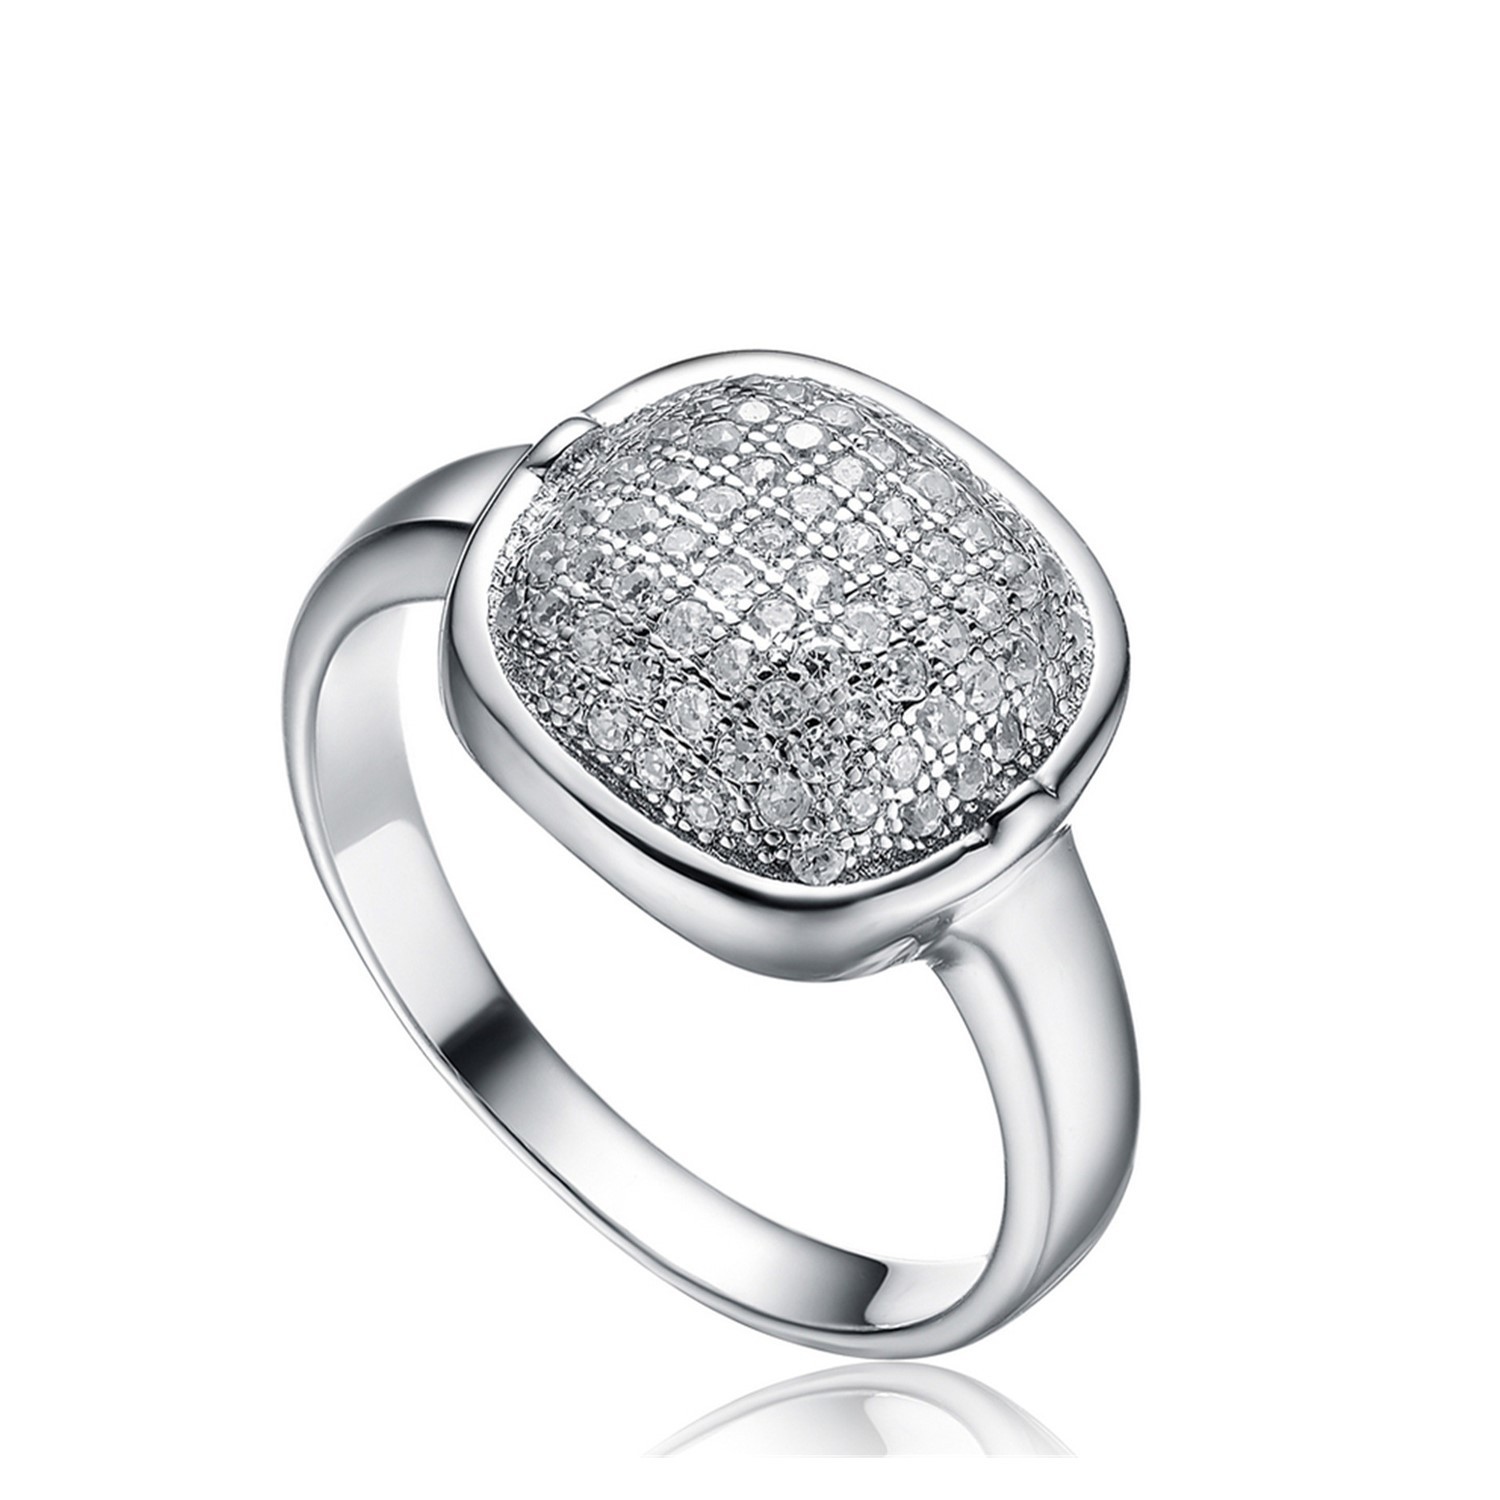 Fashion wholesale Micro Pave Cubic Zirconia jewelry Engagement Ring 925 Sterling Silver Women ring